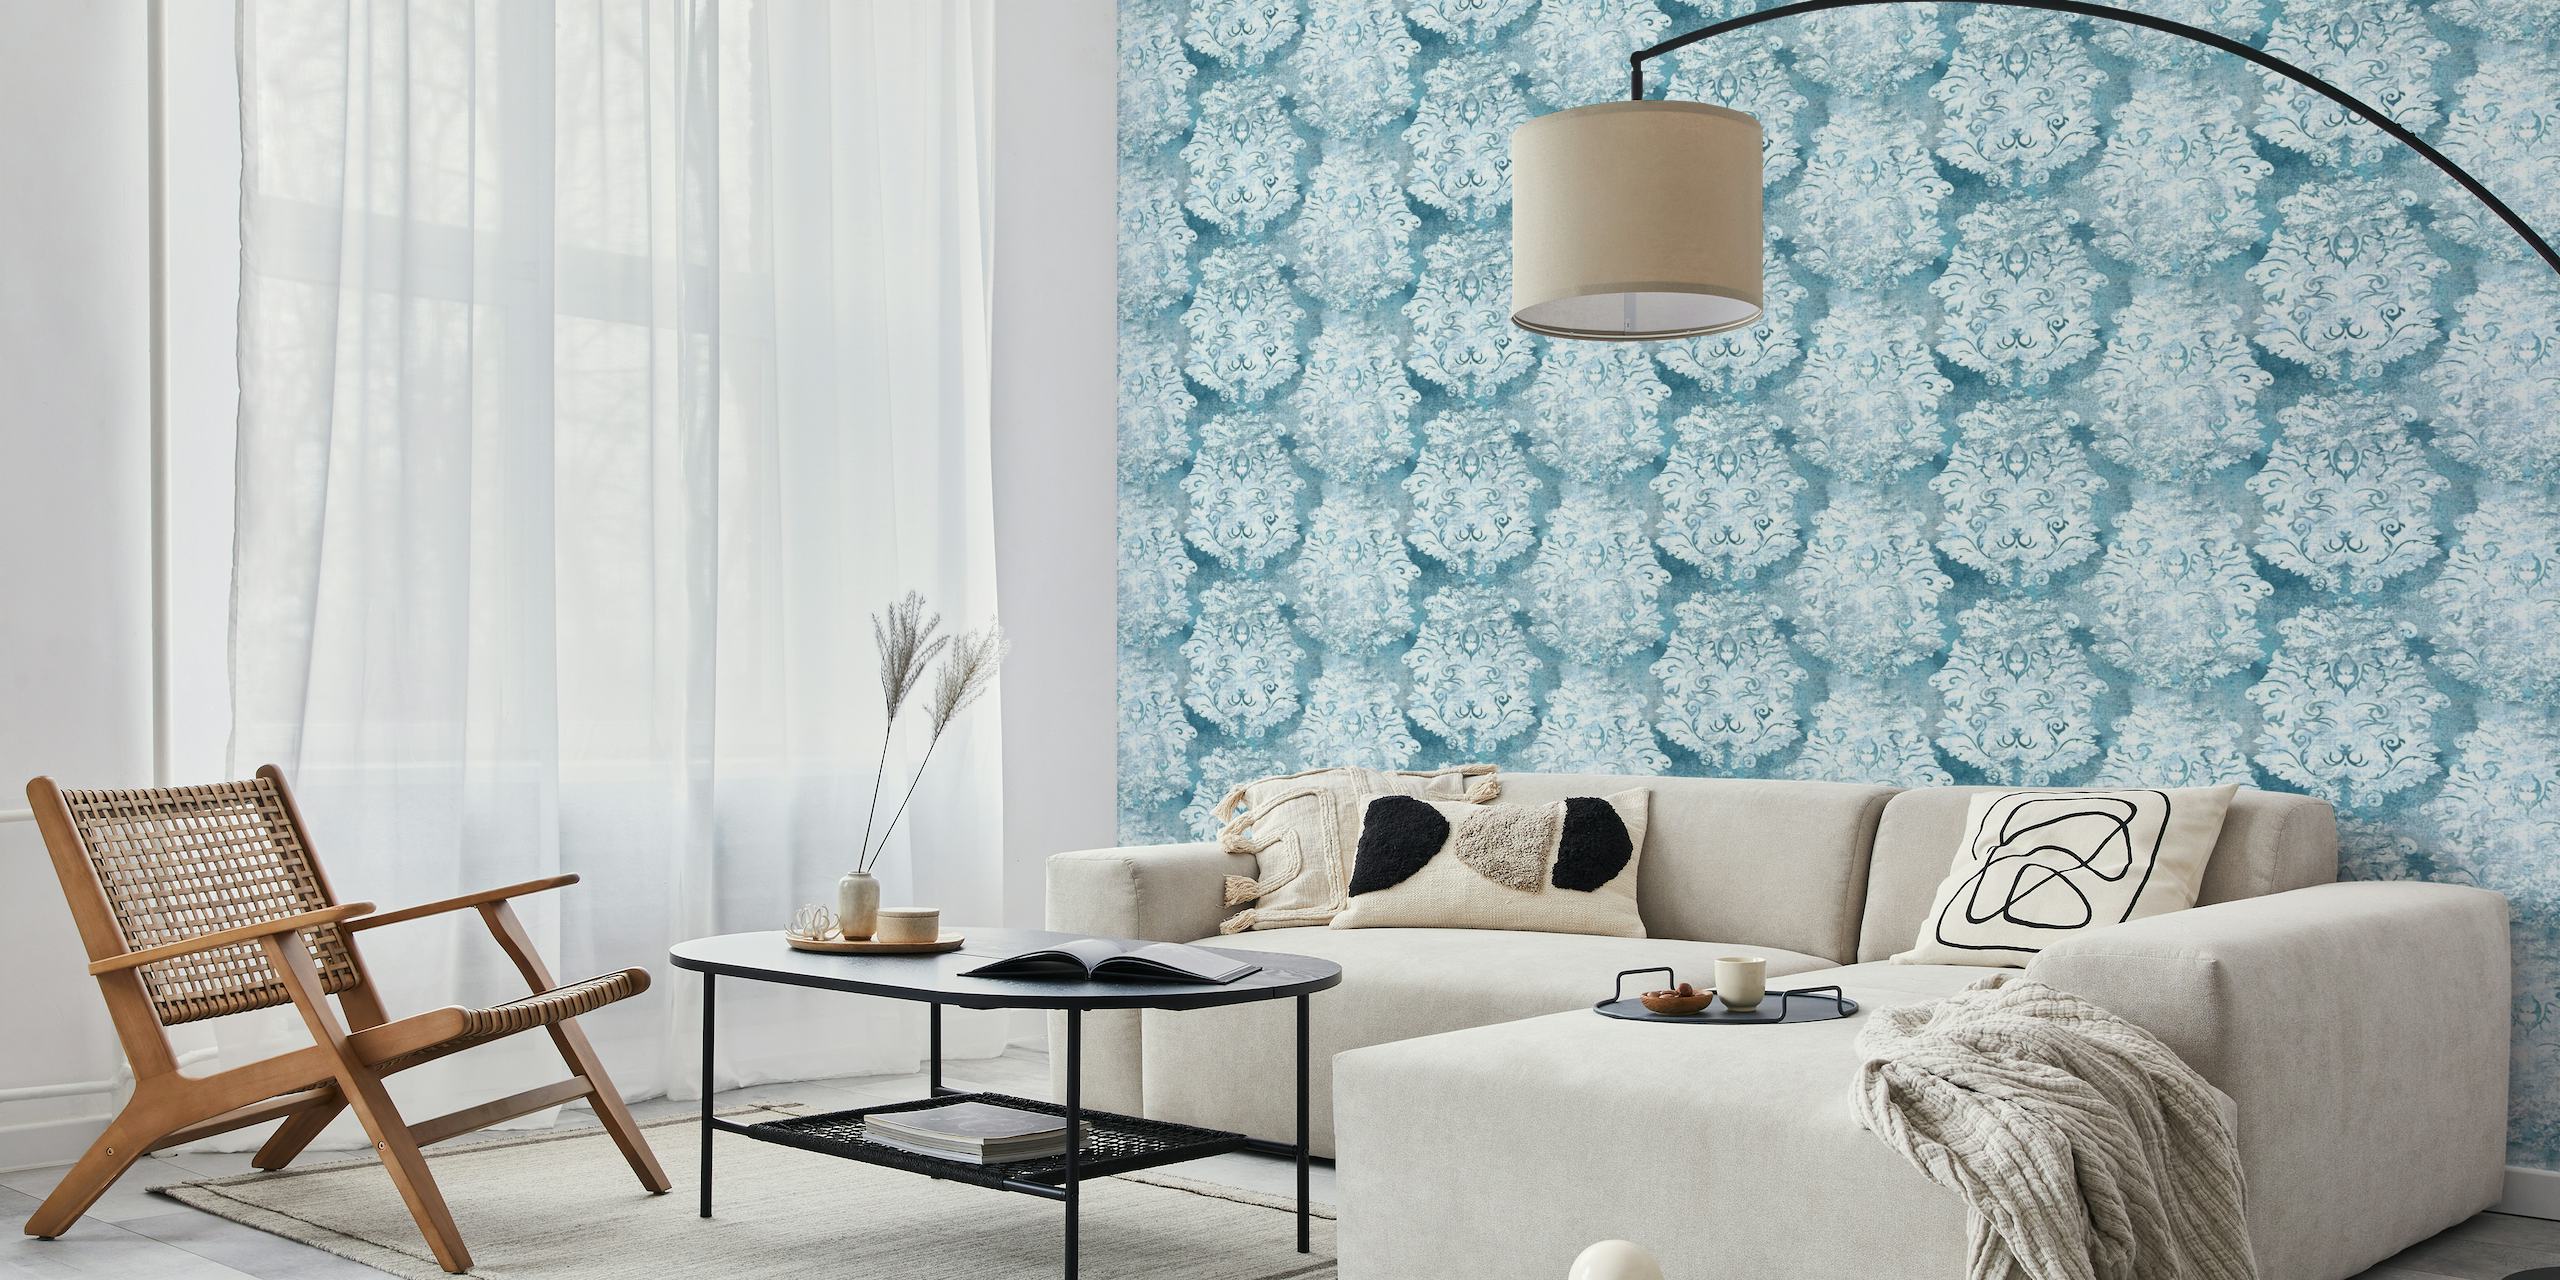 Antique damask pattern wall mural in teal blue with white floral motifs.